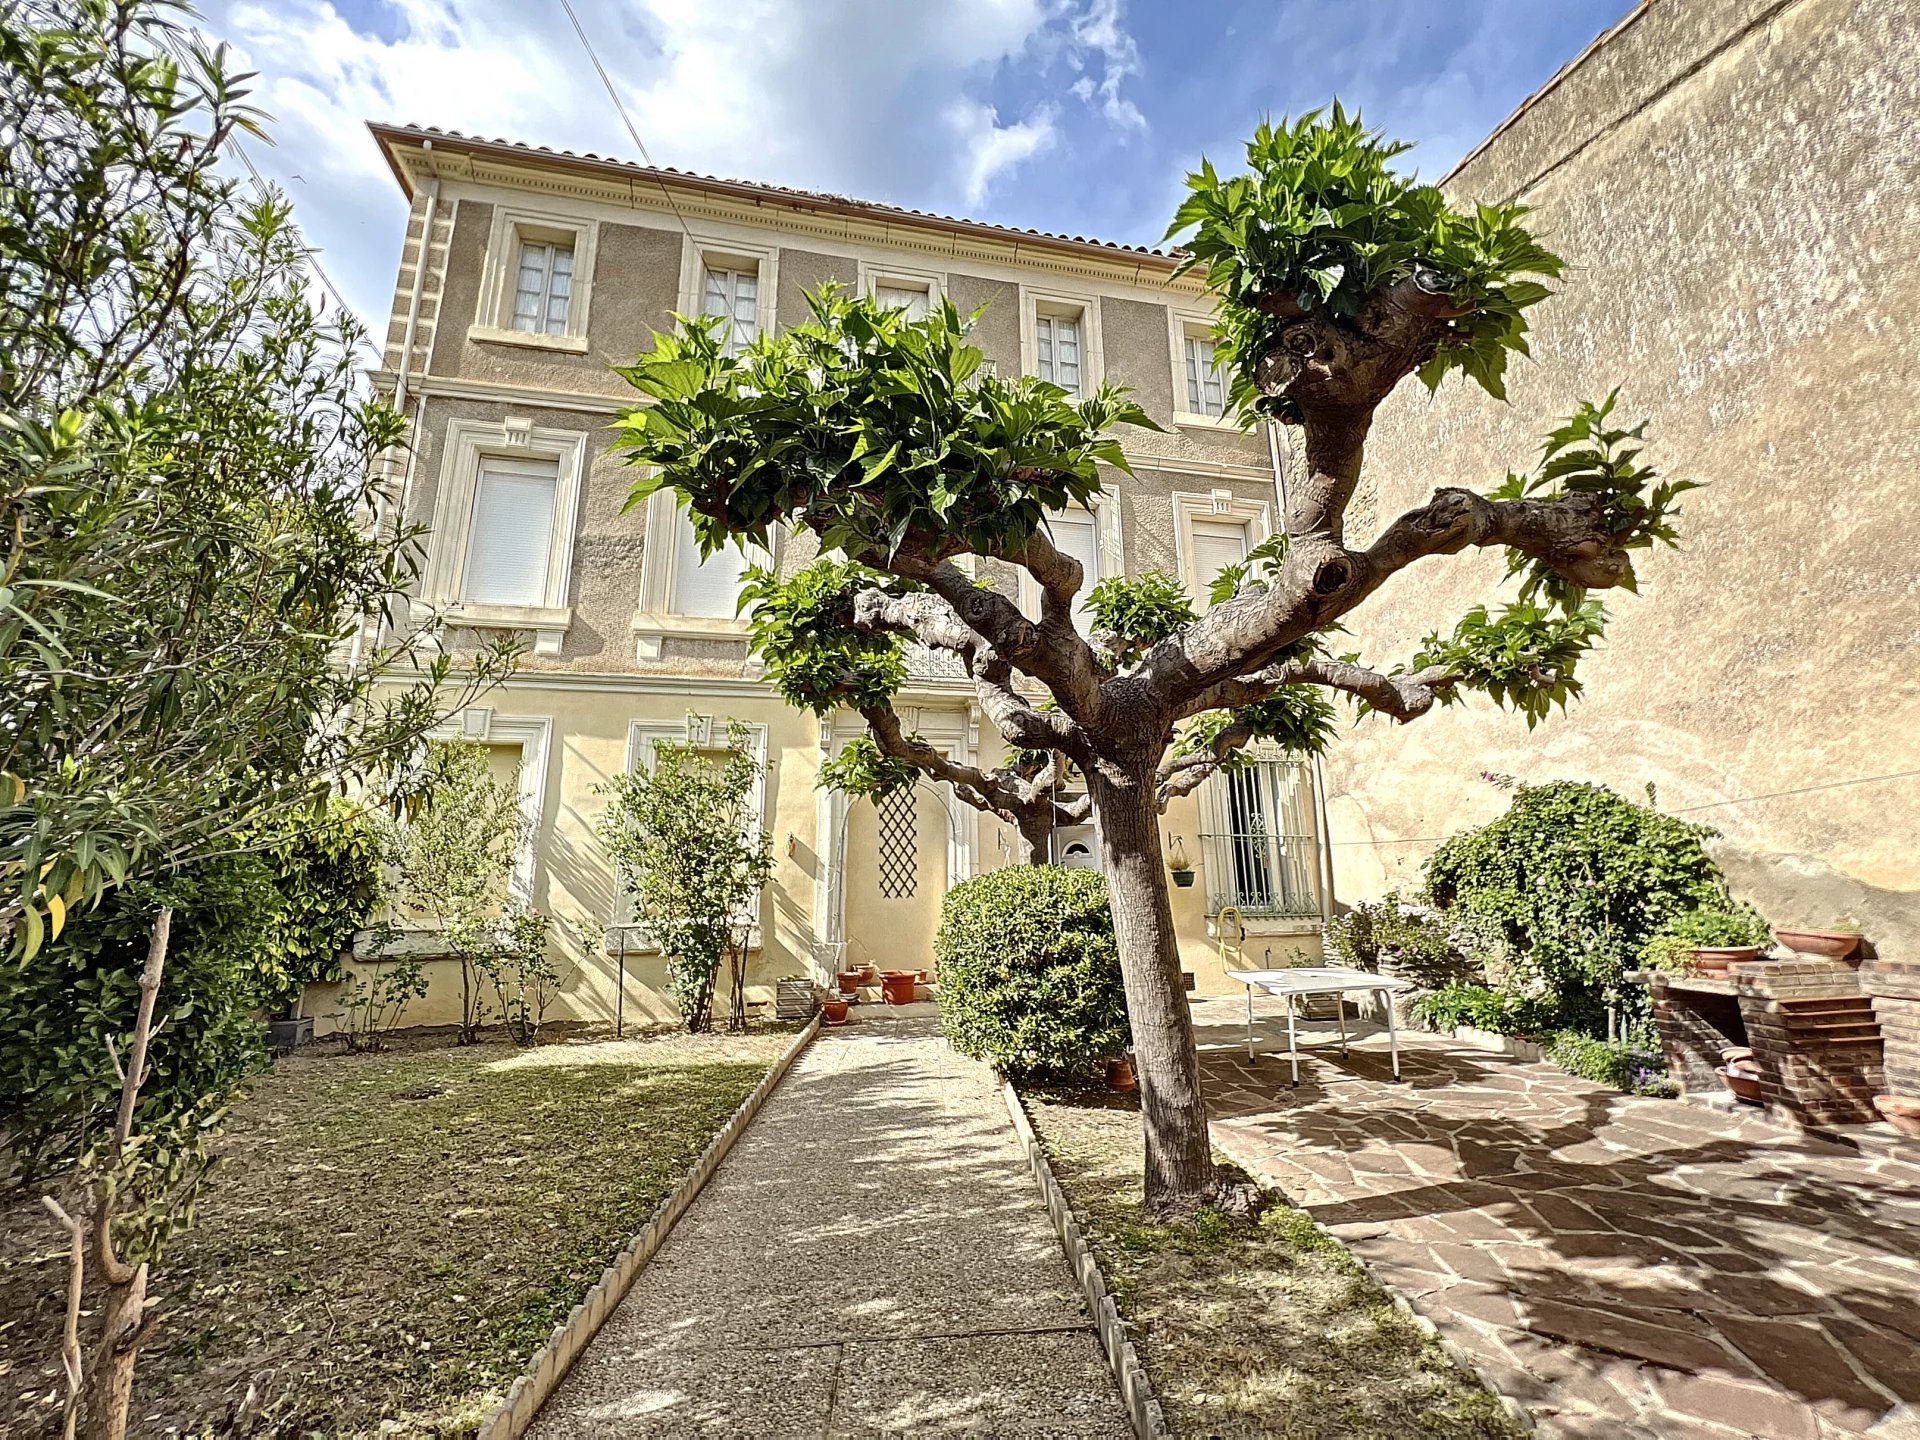 MAISON DE MAITRE TO RENOVATE WITH COURYARD AND BARN, LEZIGNAN-CORBIERE SECTOR